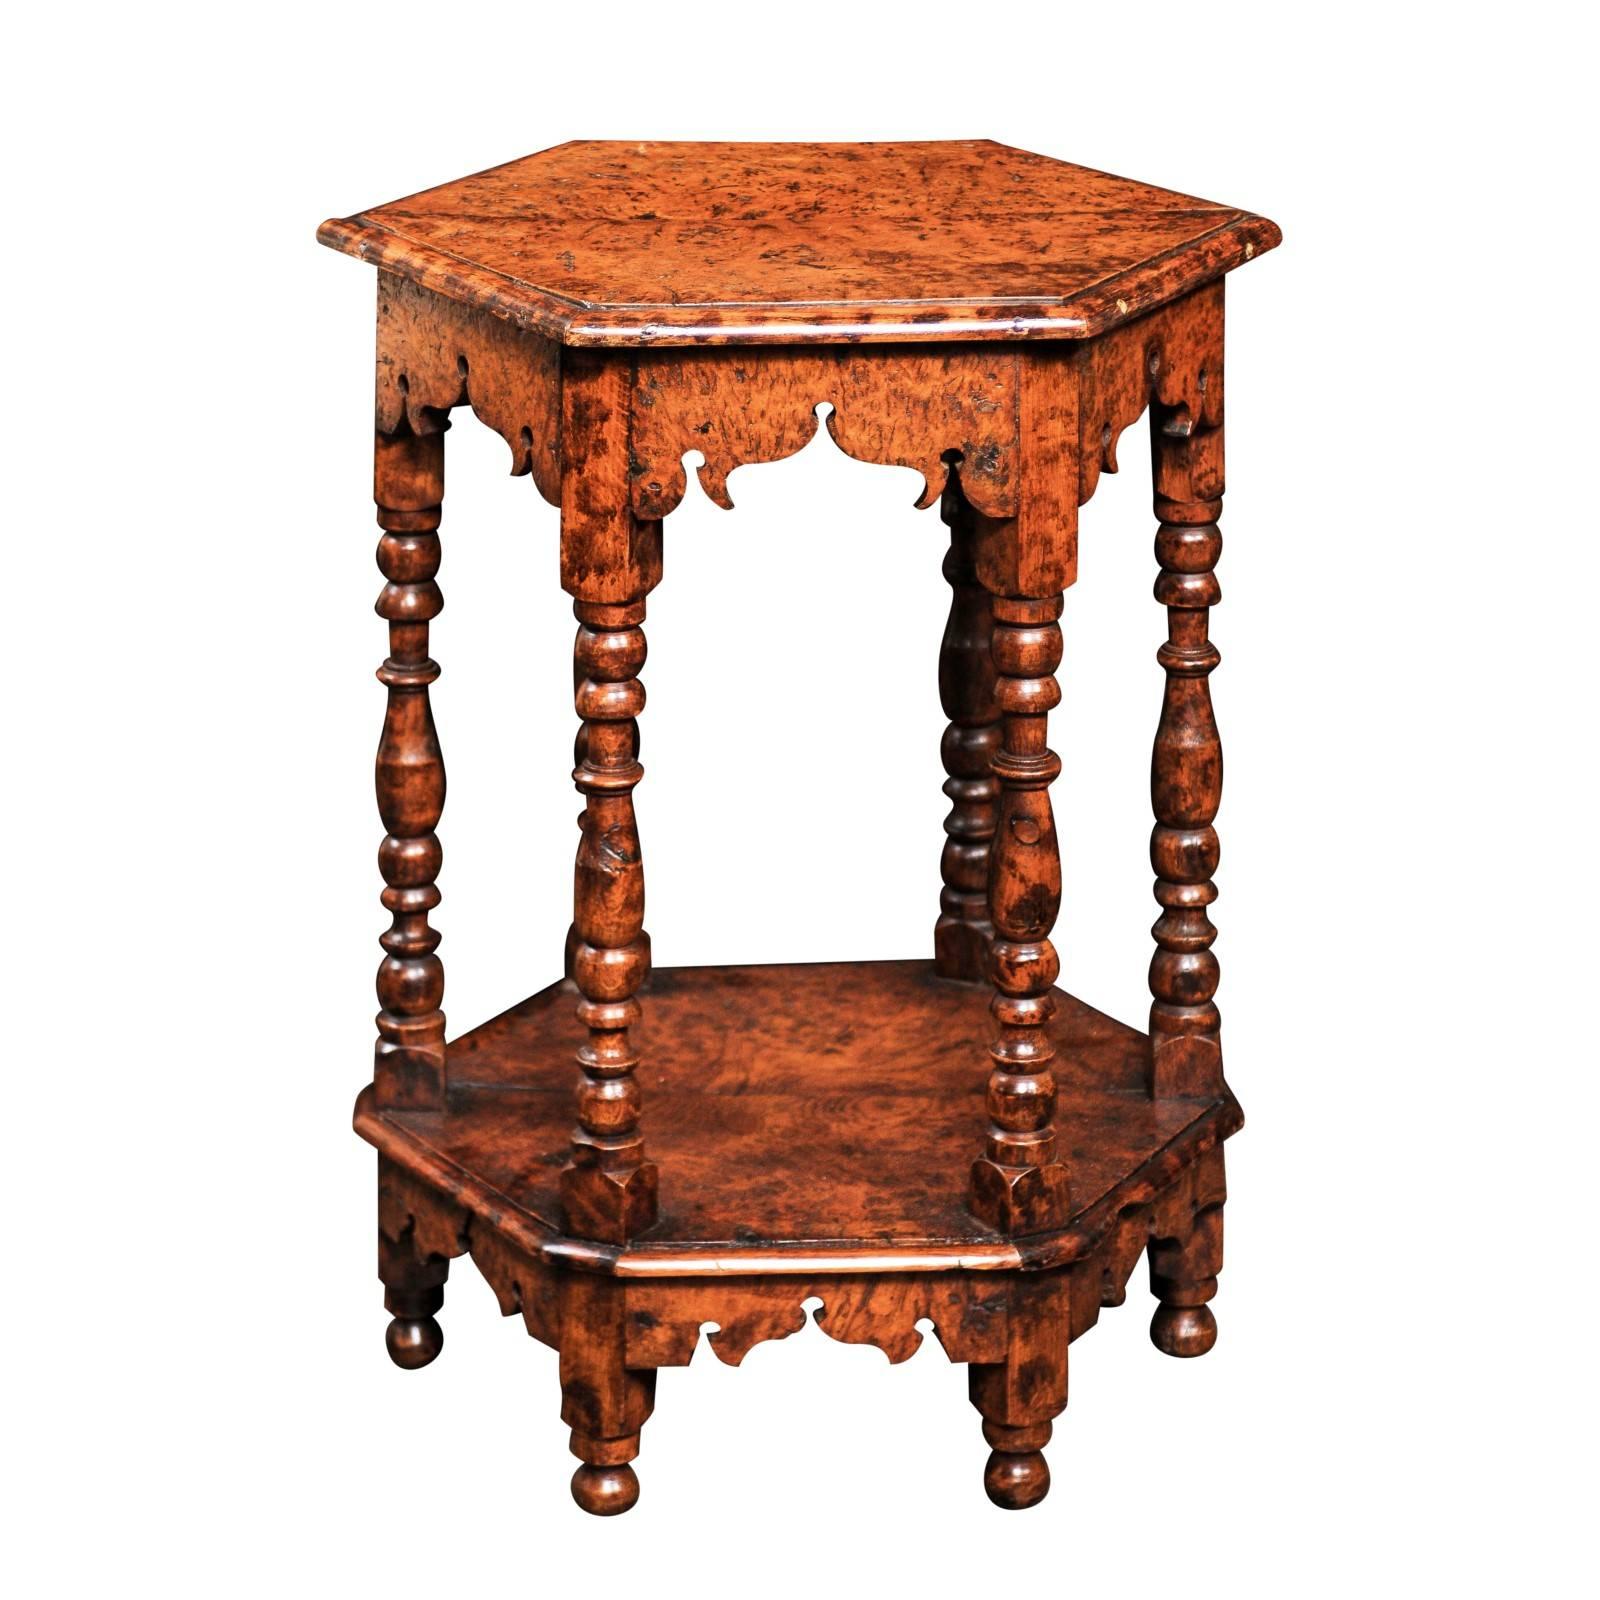 This English mid-19th century burl wood side table features an hexagonal tow-plank top with bevelled edge over an exquisitely carved apron. Six turned legs support the ensemble and secure a lower shelf. The same chinoiserie style scalloping, raised